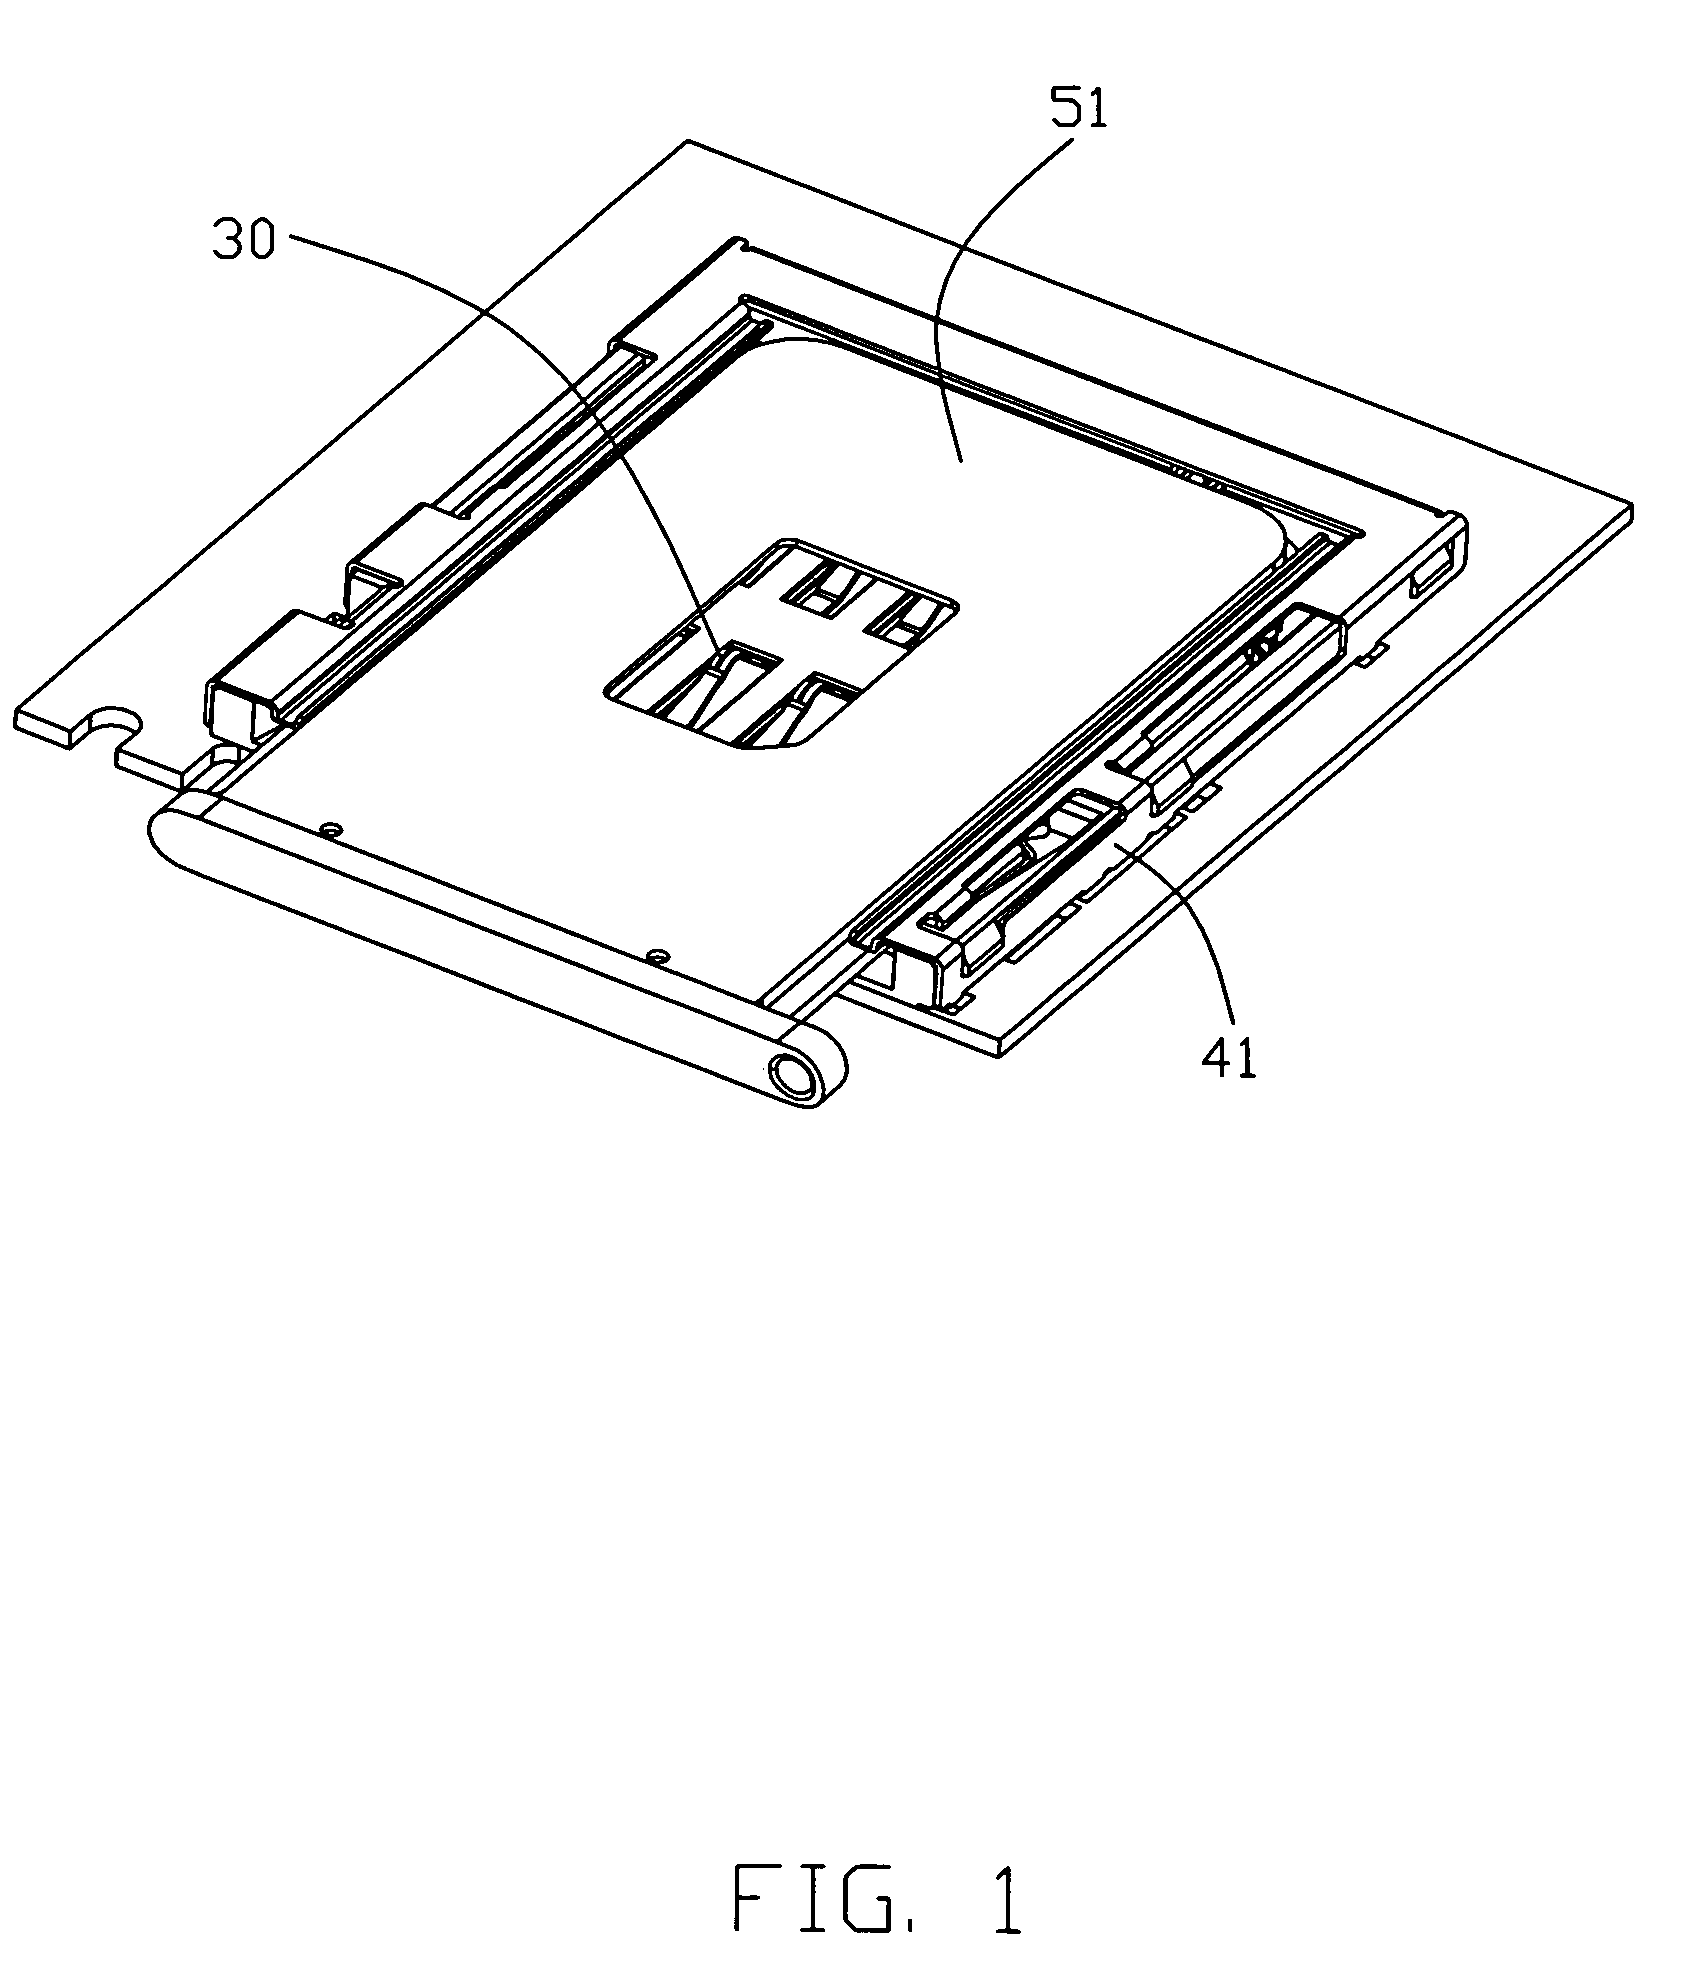 Electrical card connector with at least a card locking mechanism